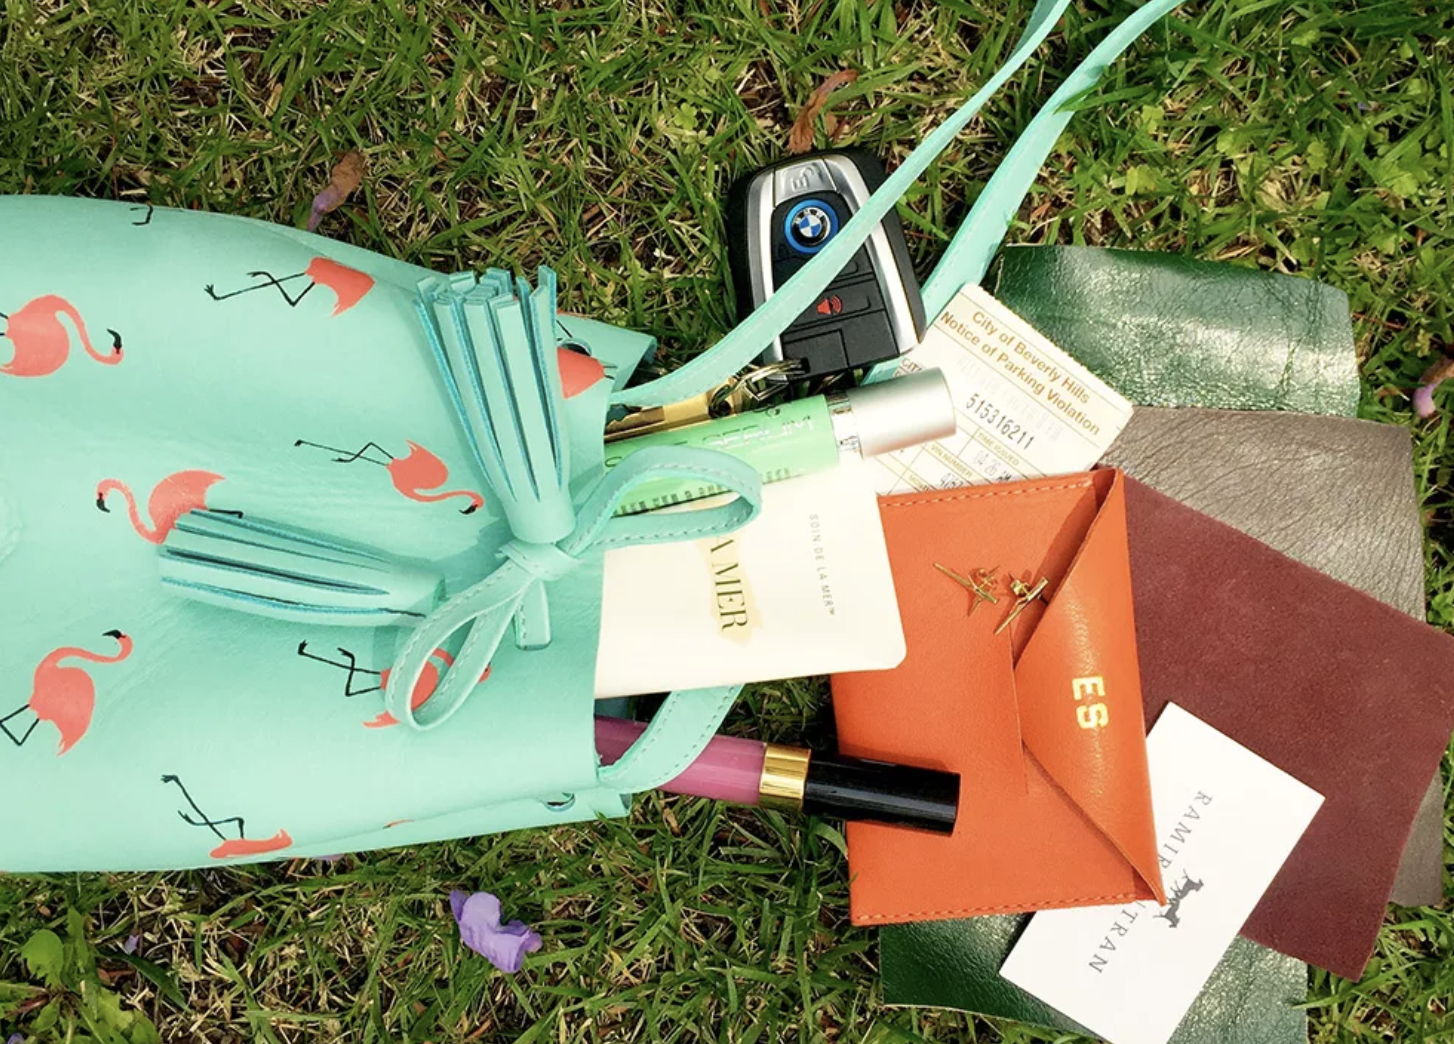 Designer Erin Shaffer’s Bag Holds Parking Tickets and Sole Serum ~ Racked Los Angeles